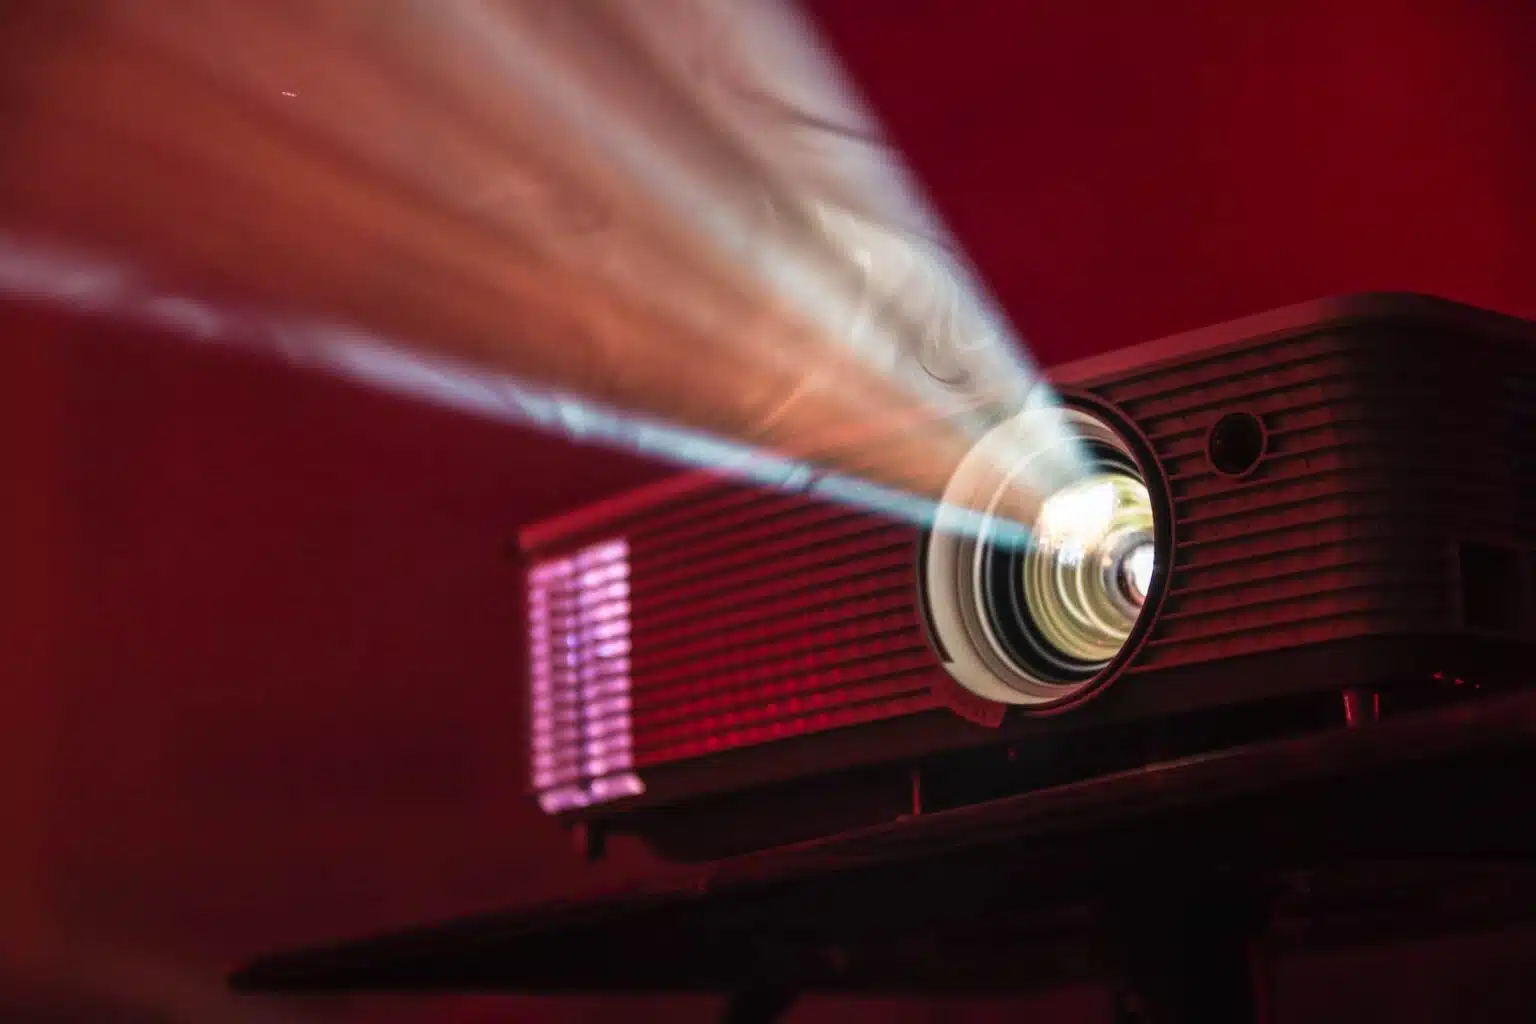 How to Stop a Projector From Overheating